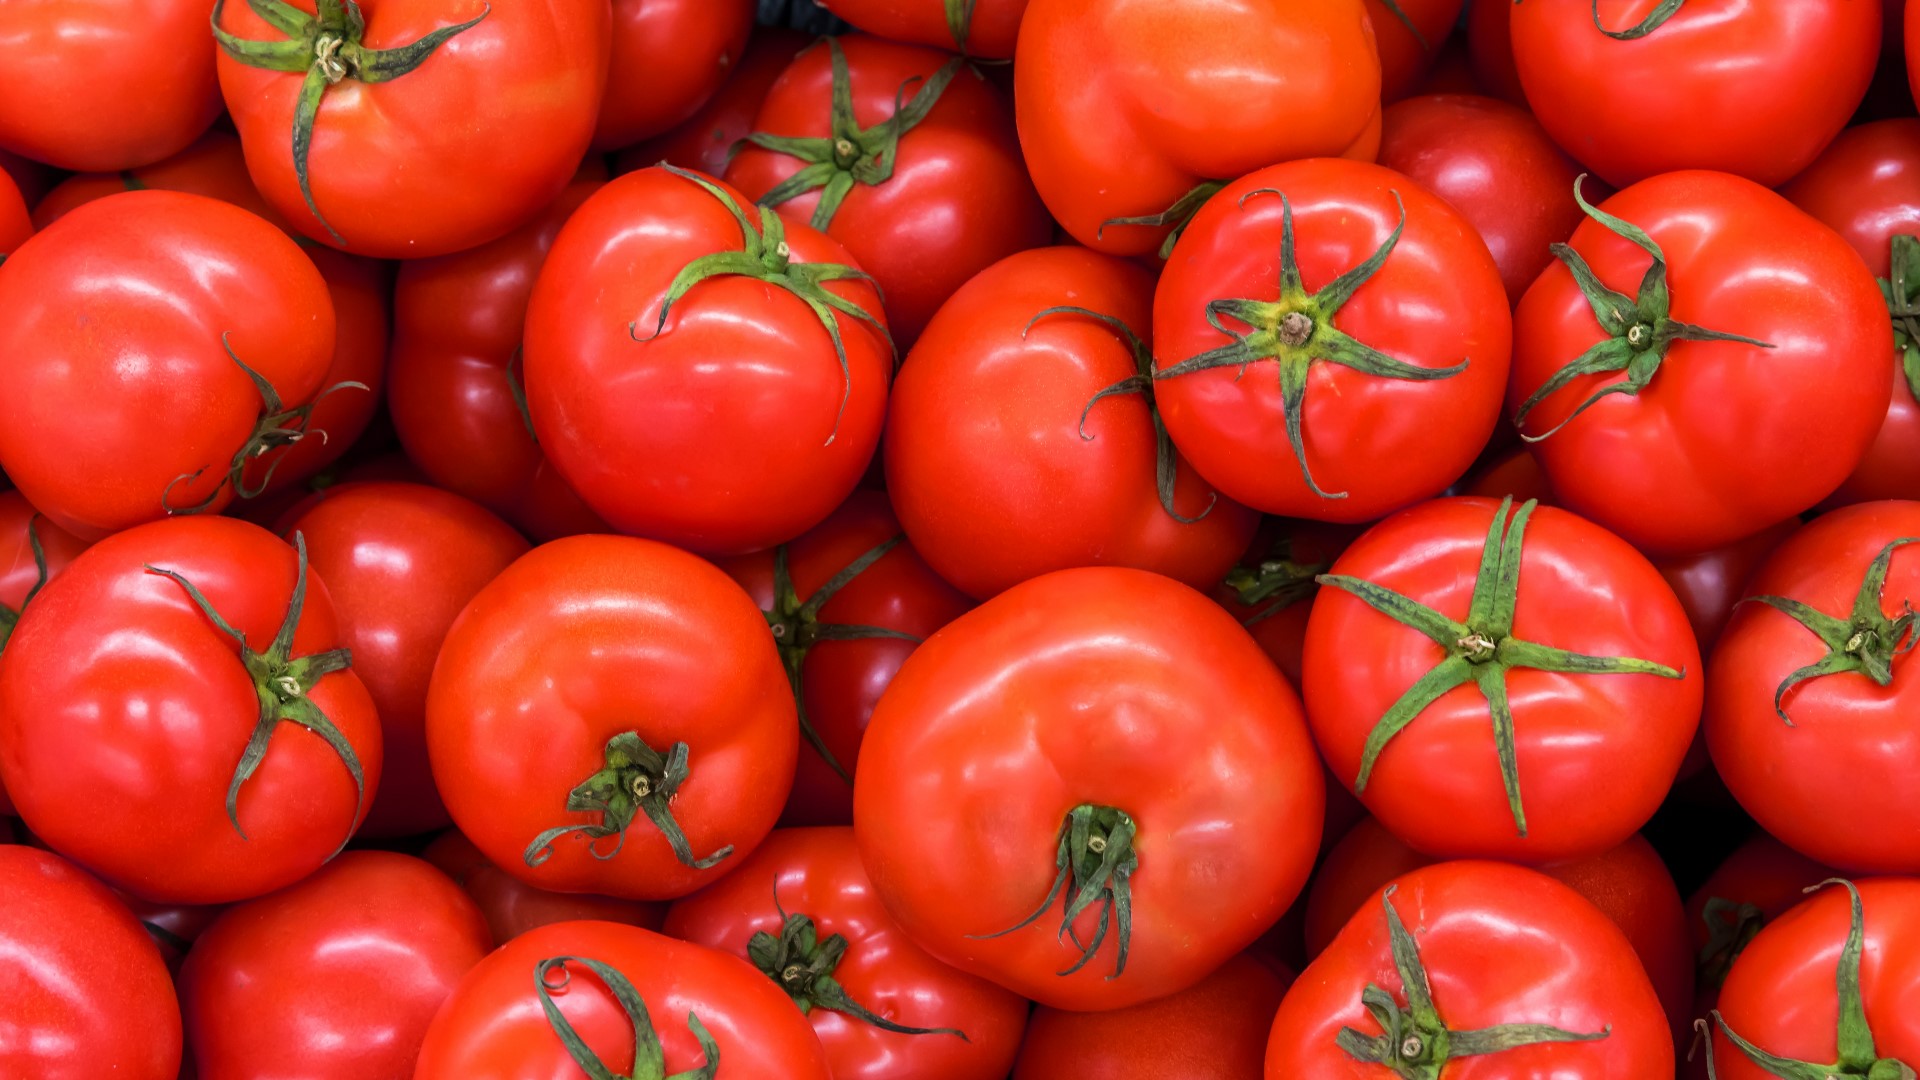 You can start planting tomato seeds indoors 6-8 weeks before our last frost.